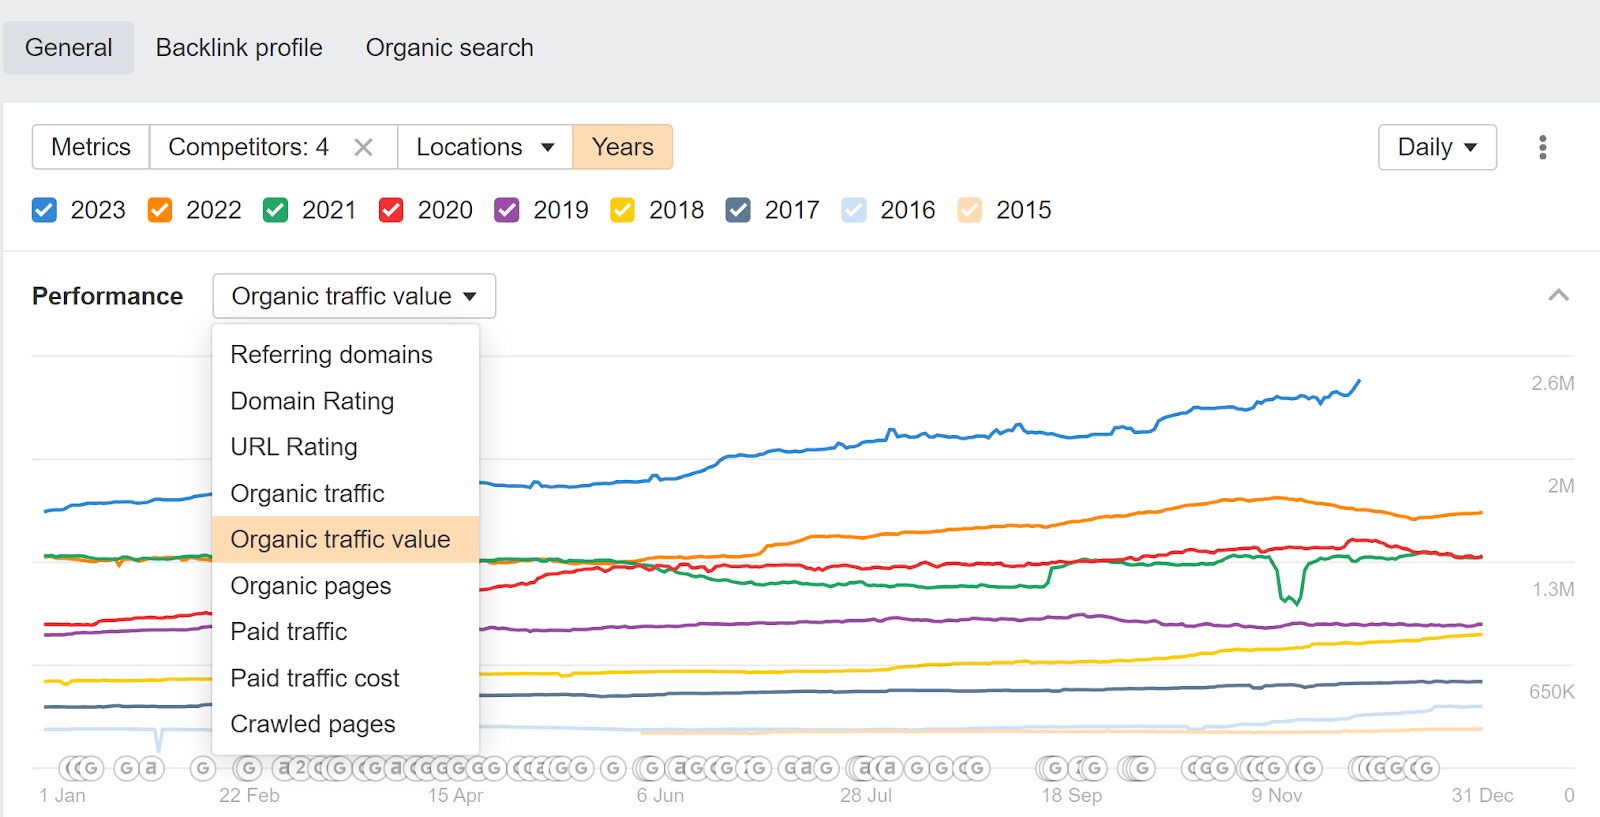 YoY trended view for various SEO metrics, via the Overview in Ahrefs' Site Explorer